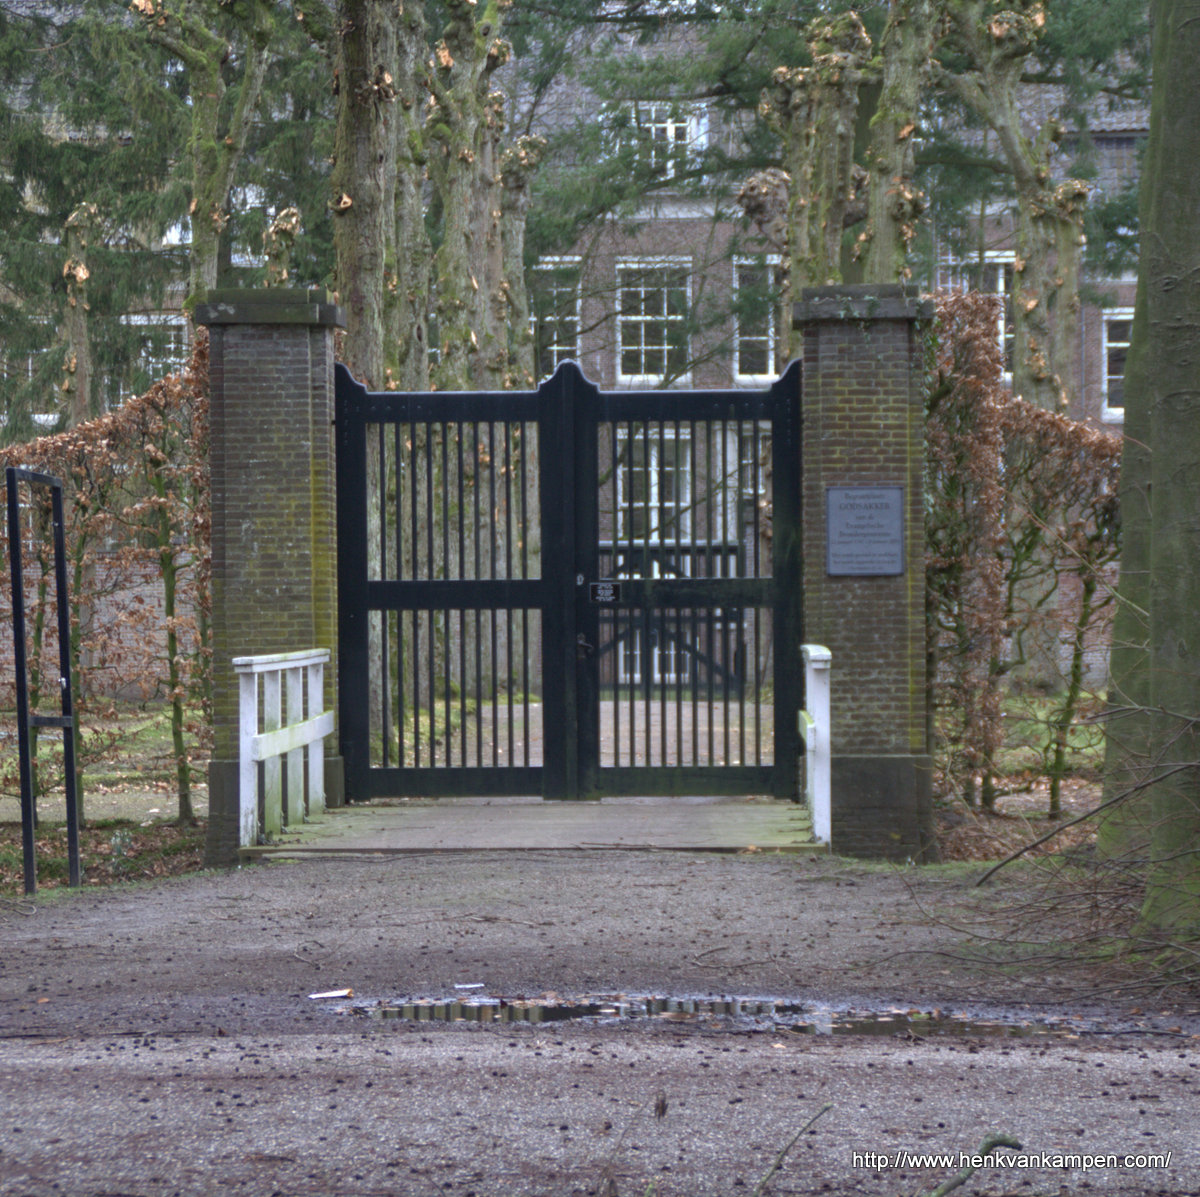 Entrance of the Morovian Cemetery in Zeist